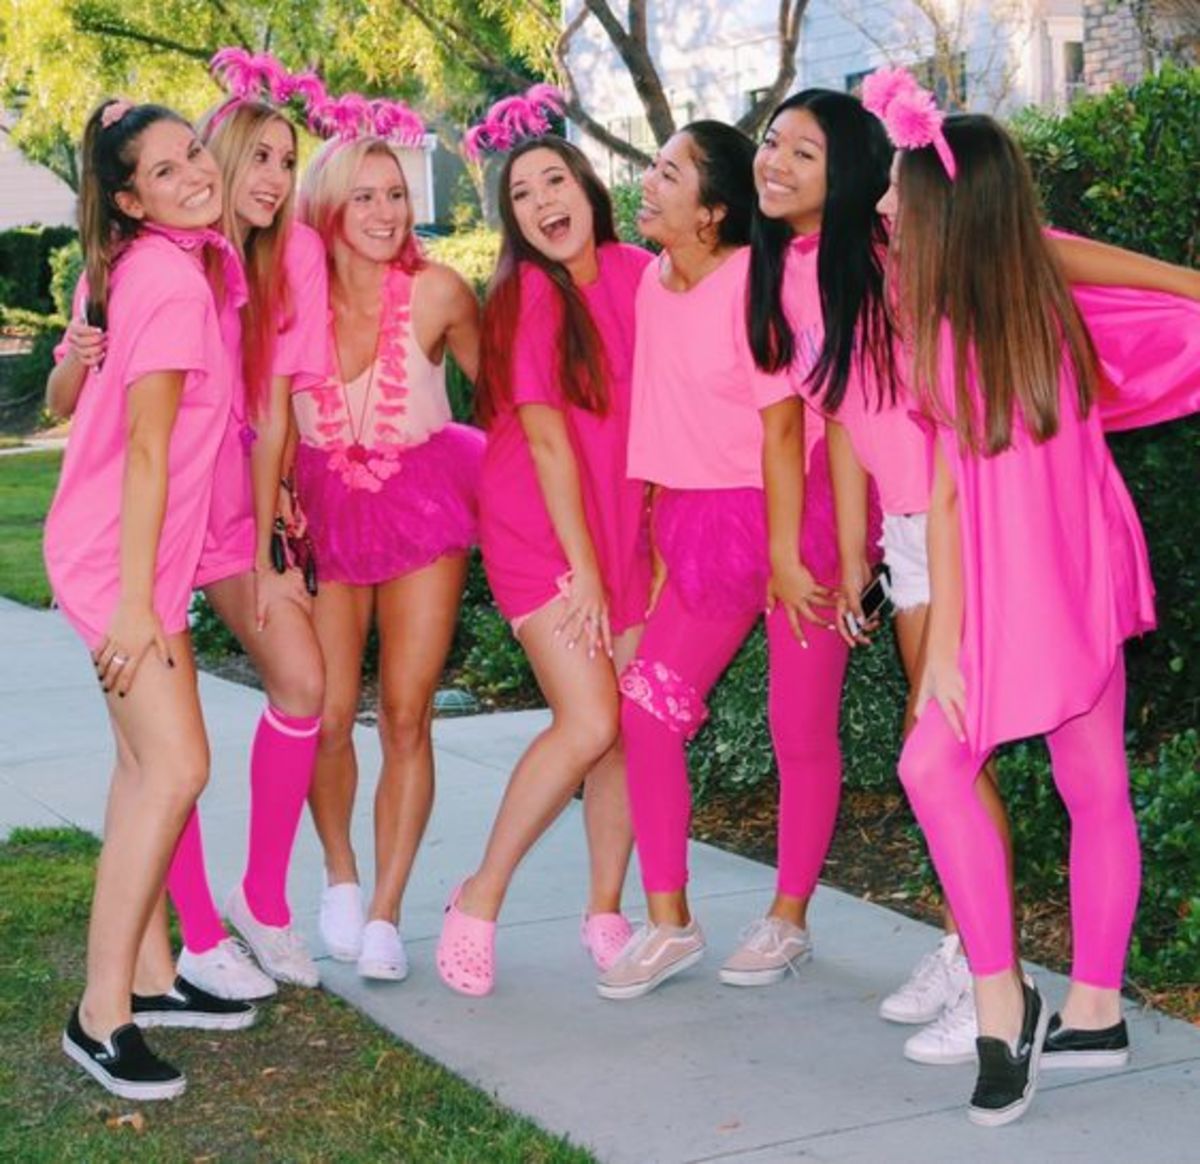 https://images.saymedia-content.com/.image/t_share/MjAwNjI2NTM2NzU4Mzg3ODIw/55-super-cool-halloween-costumes-for-teenage-girls.jpg